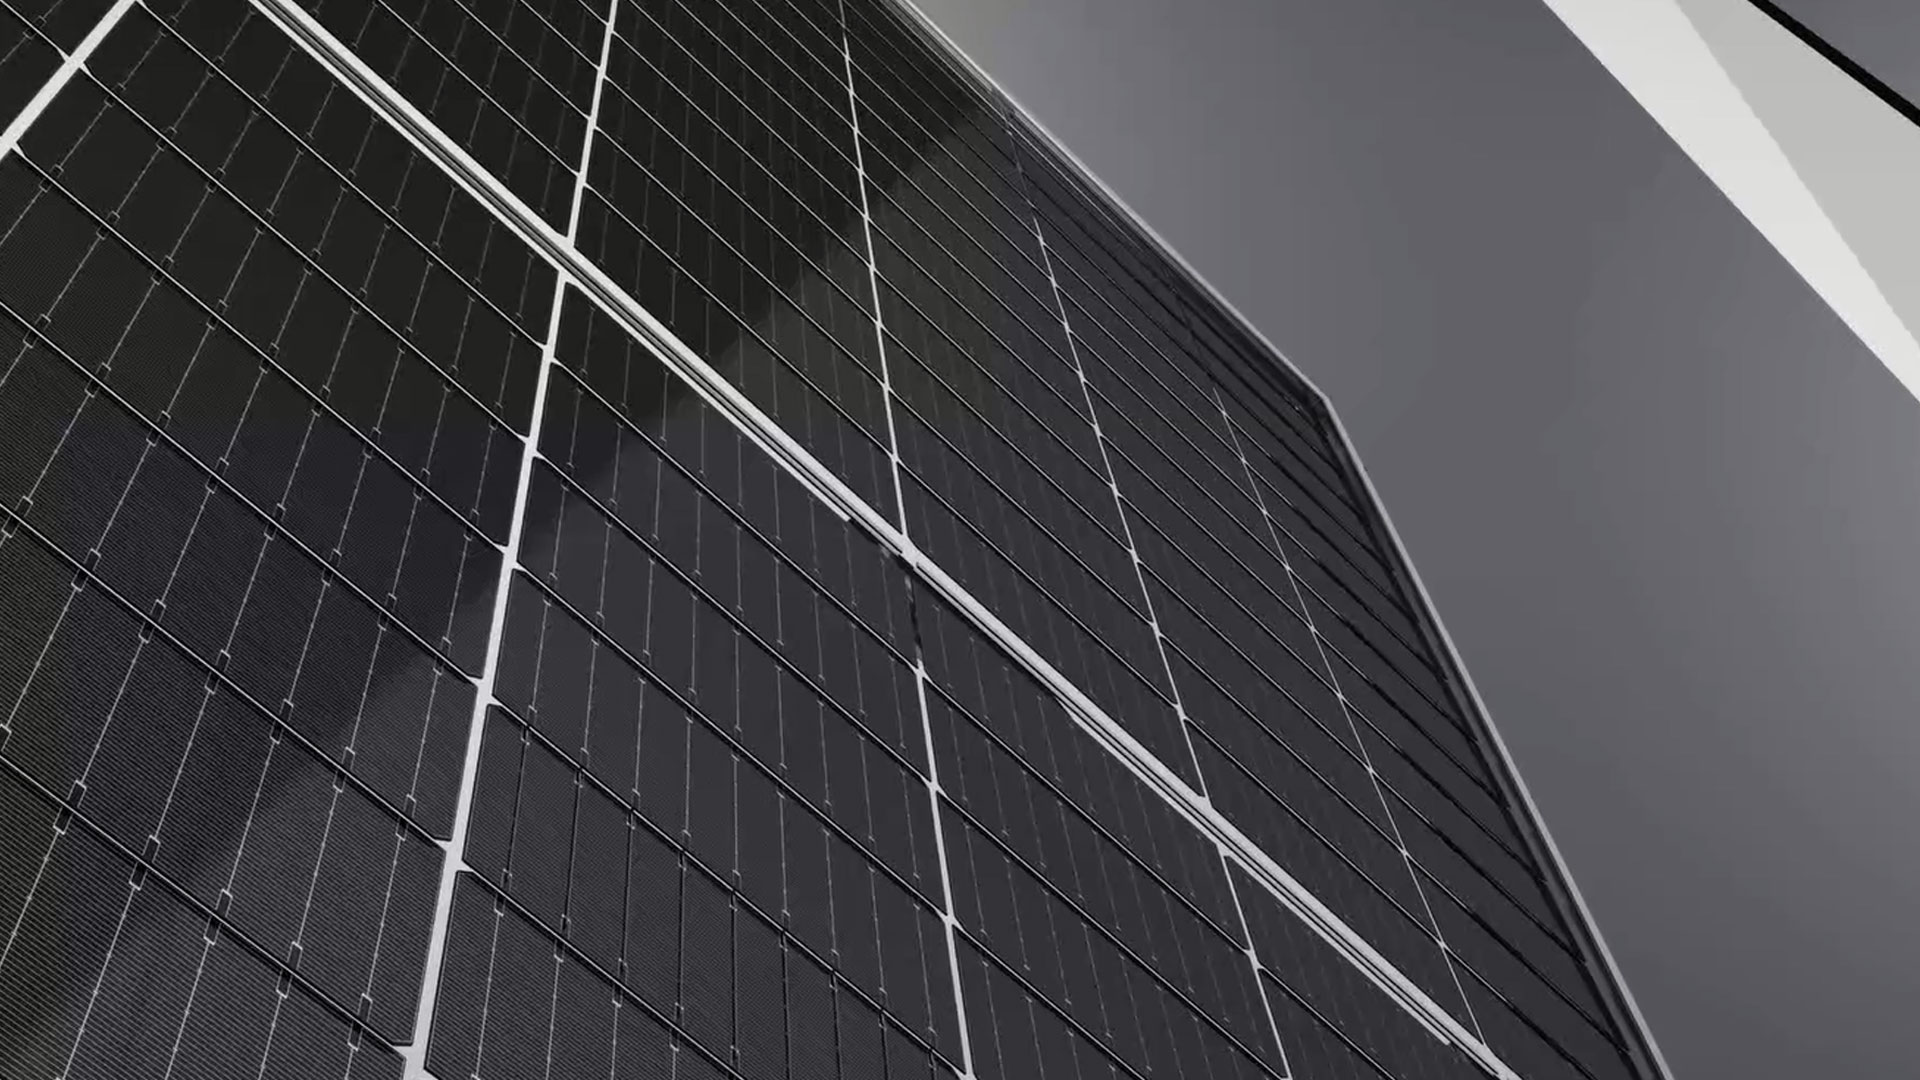 JinkoSolar Holding Co., Ltd. announced a significant breakthrough in the development of its perovskite tandem solar cell based on N-type TOPCon. Photo Credits: Jinko Solar Co. Ltd.